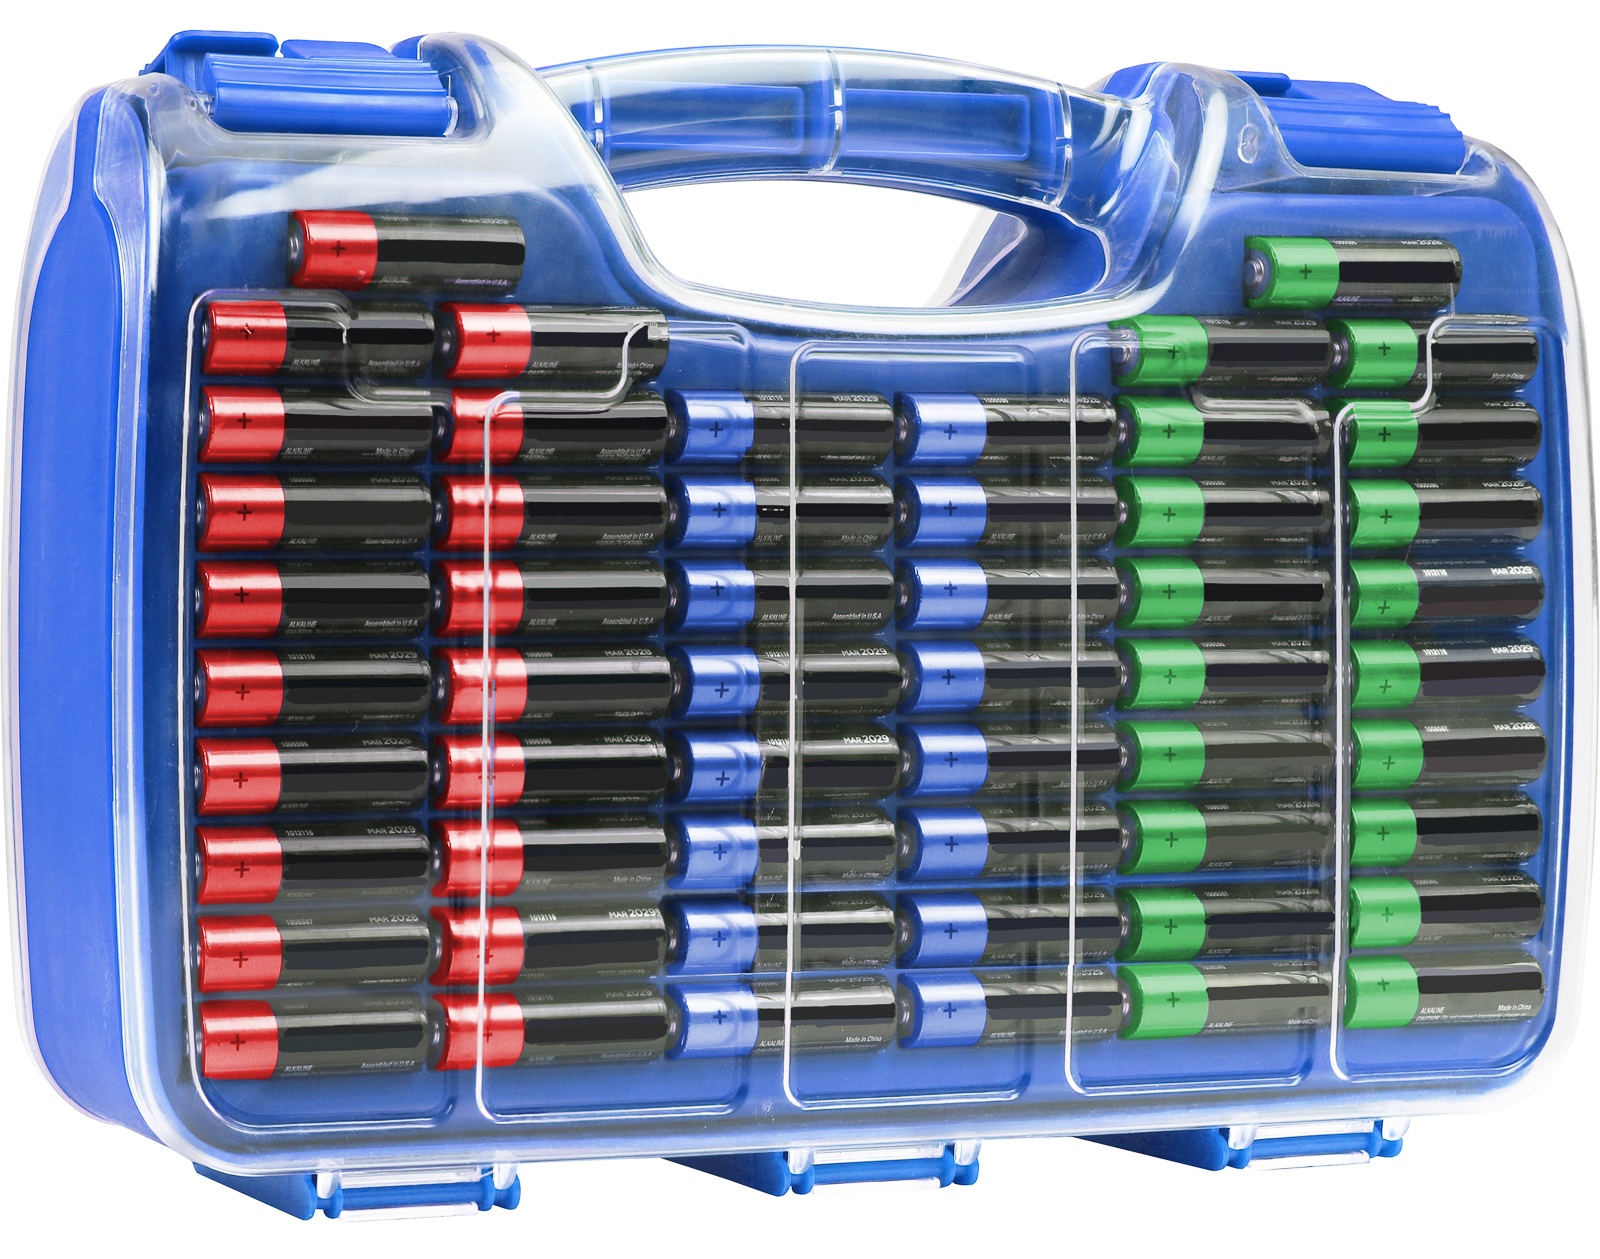 The Battery Organizer Battery Storage Case with Hinged Clear Cover, Includes a Removable Battery Tester, Holds 180 Batteries Various Sizes Blue. - image 5 of 7